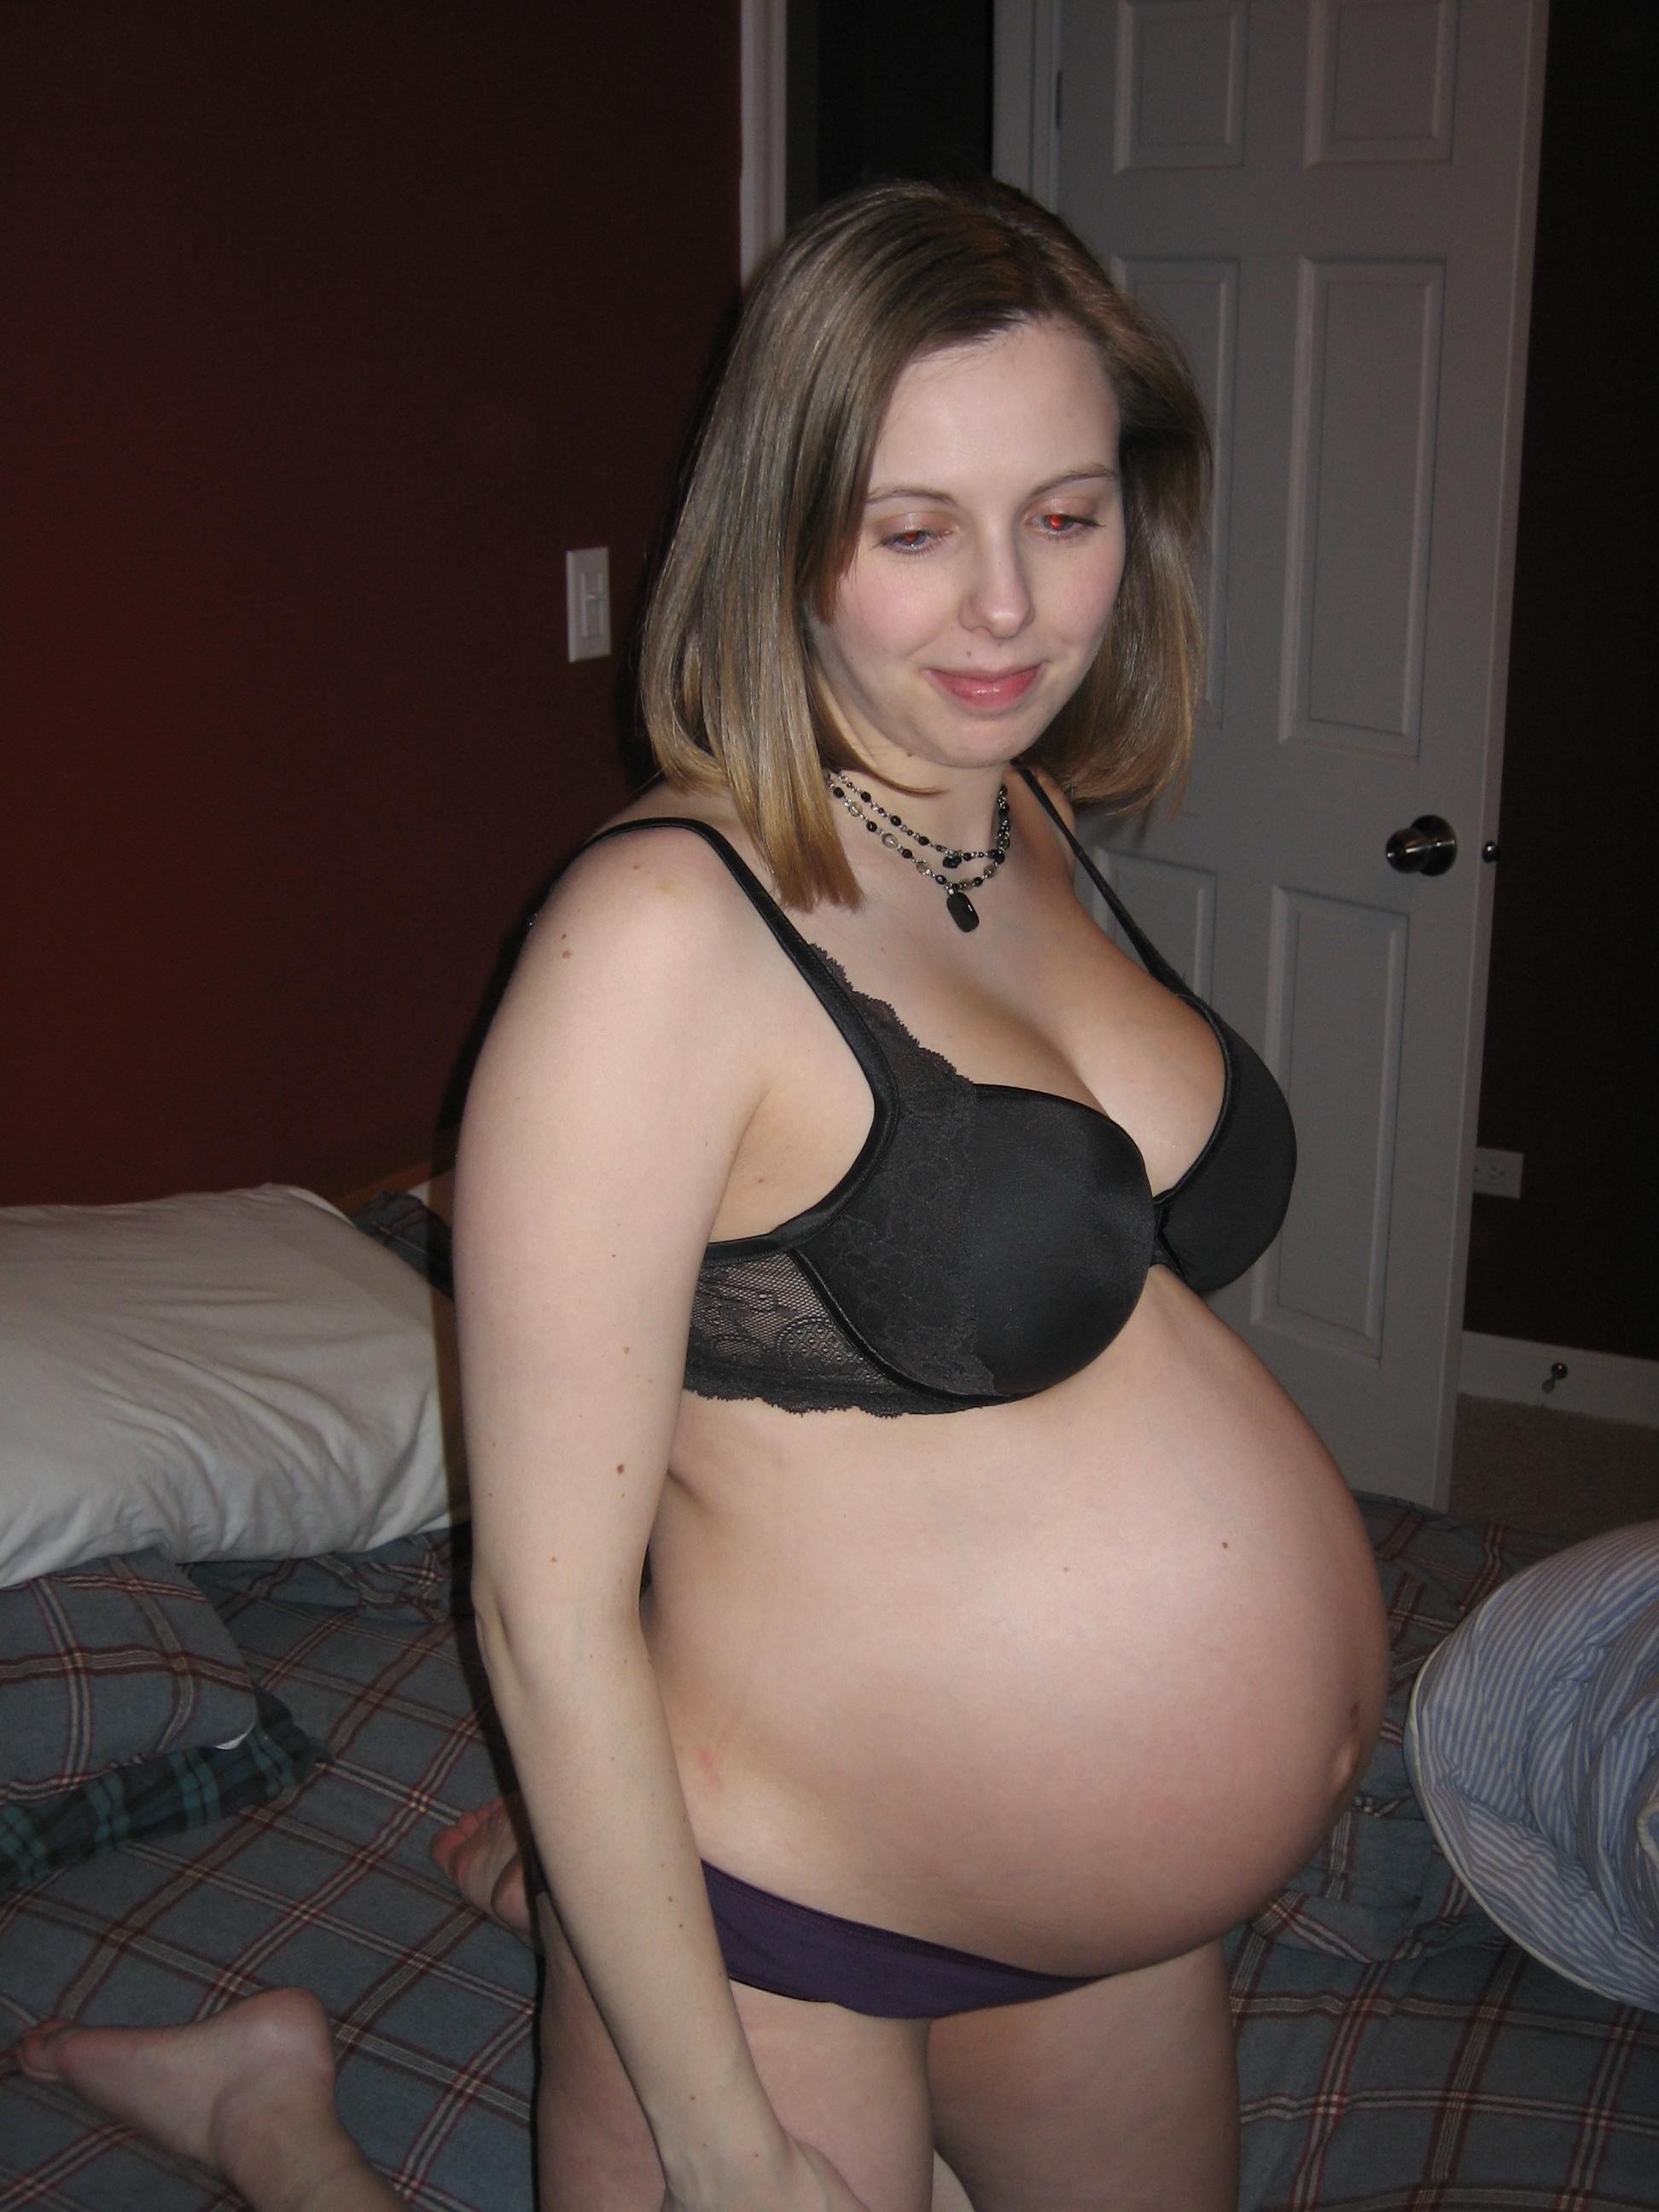 Amateur Pregnant Mature Wife with Tramp Stamp Wearing Pink Panties